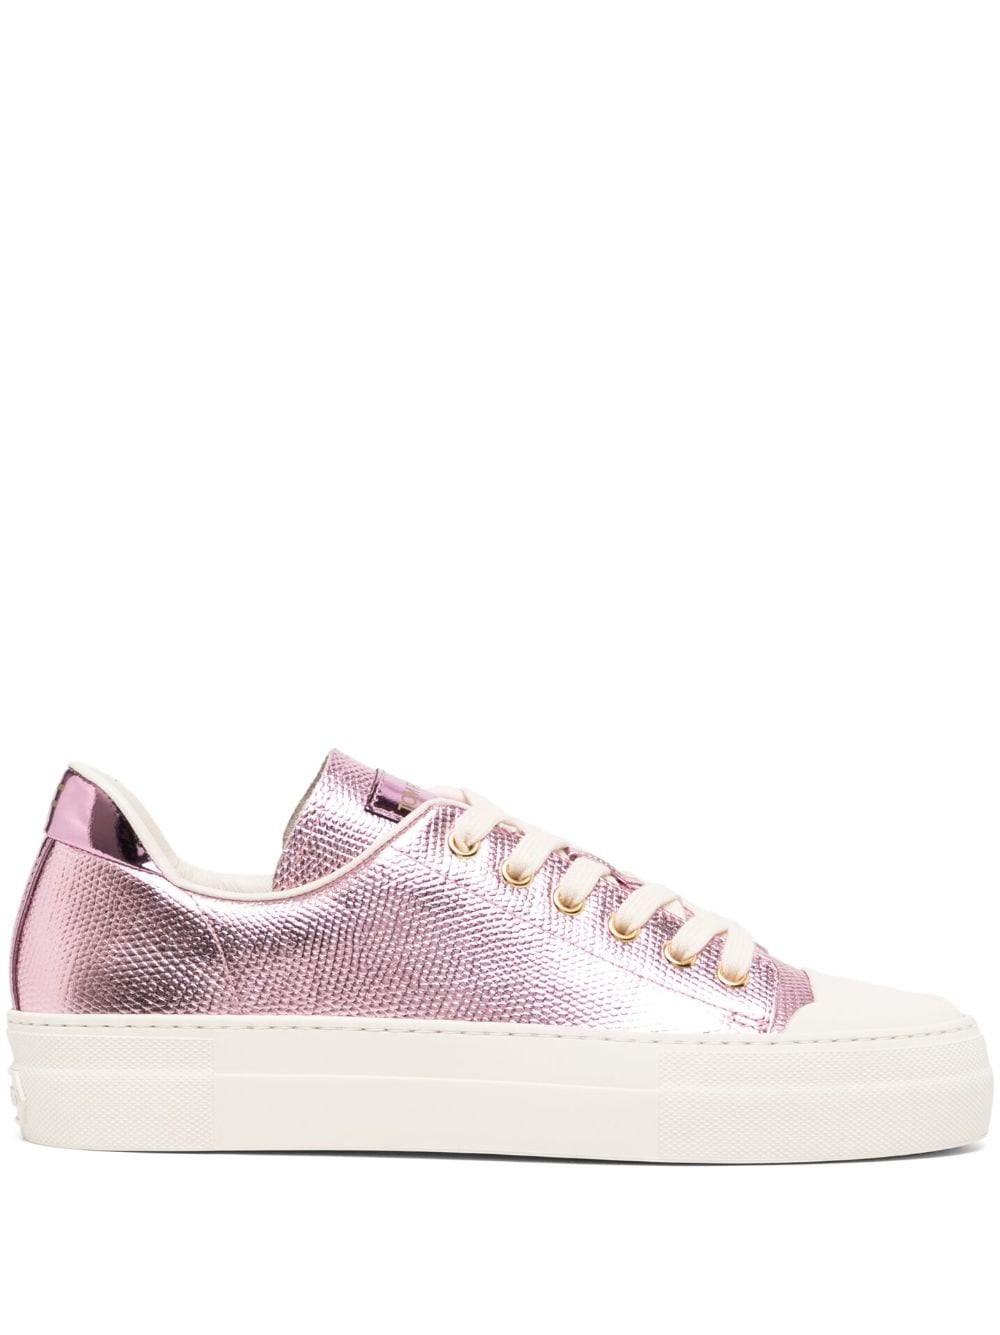 TOM FORD City metallic-finish sneakers - Pink von TOM FORD